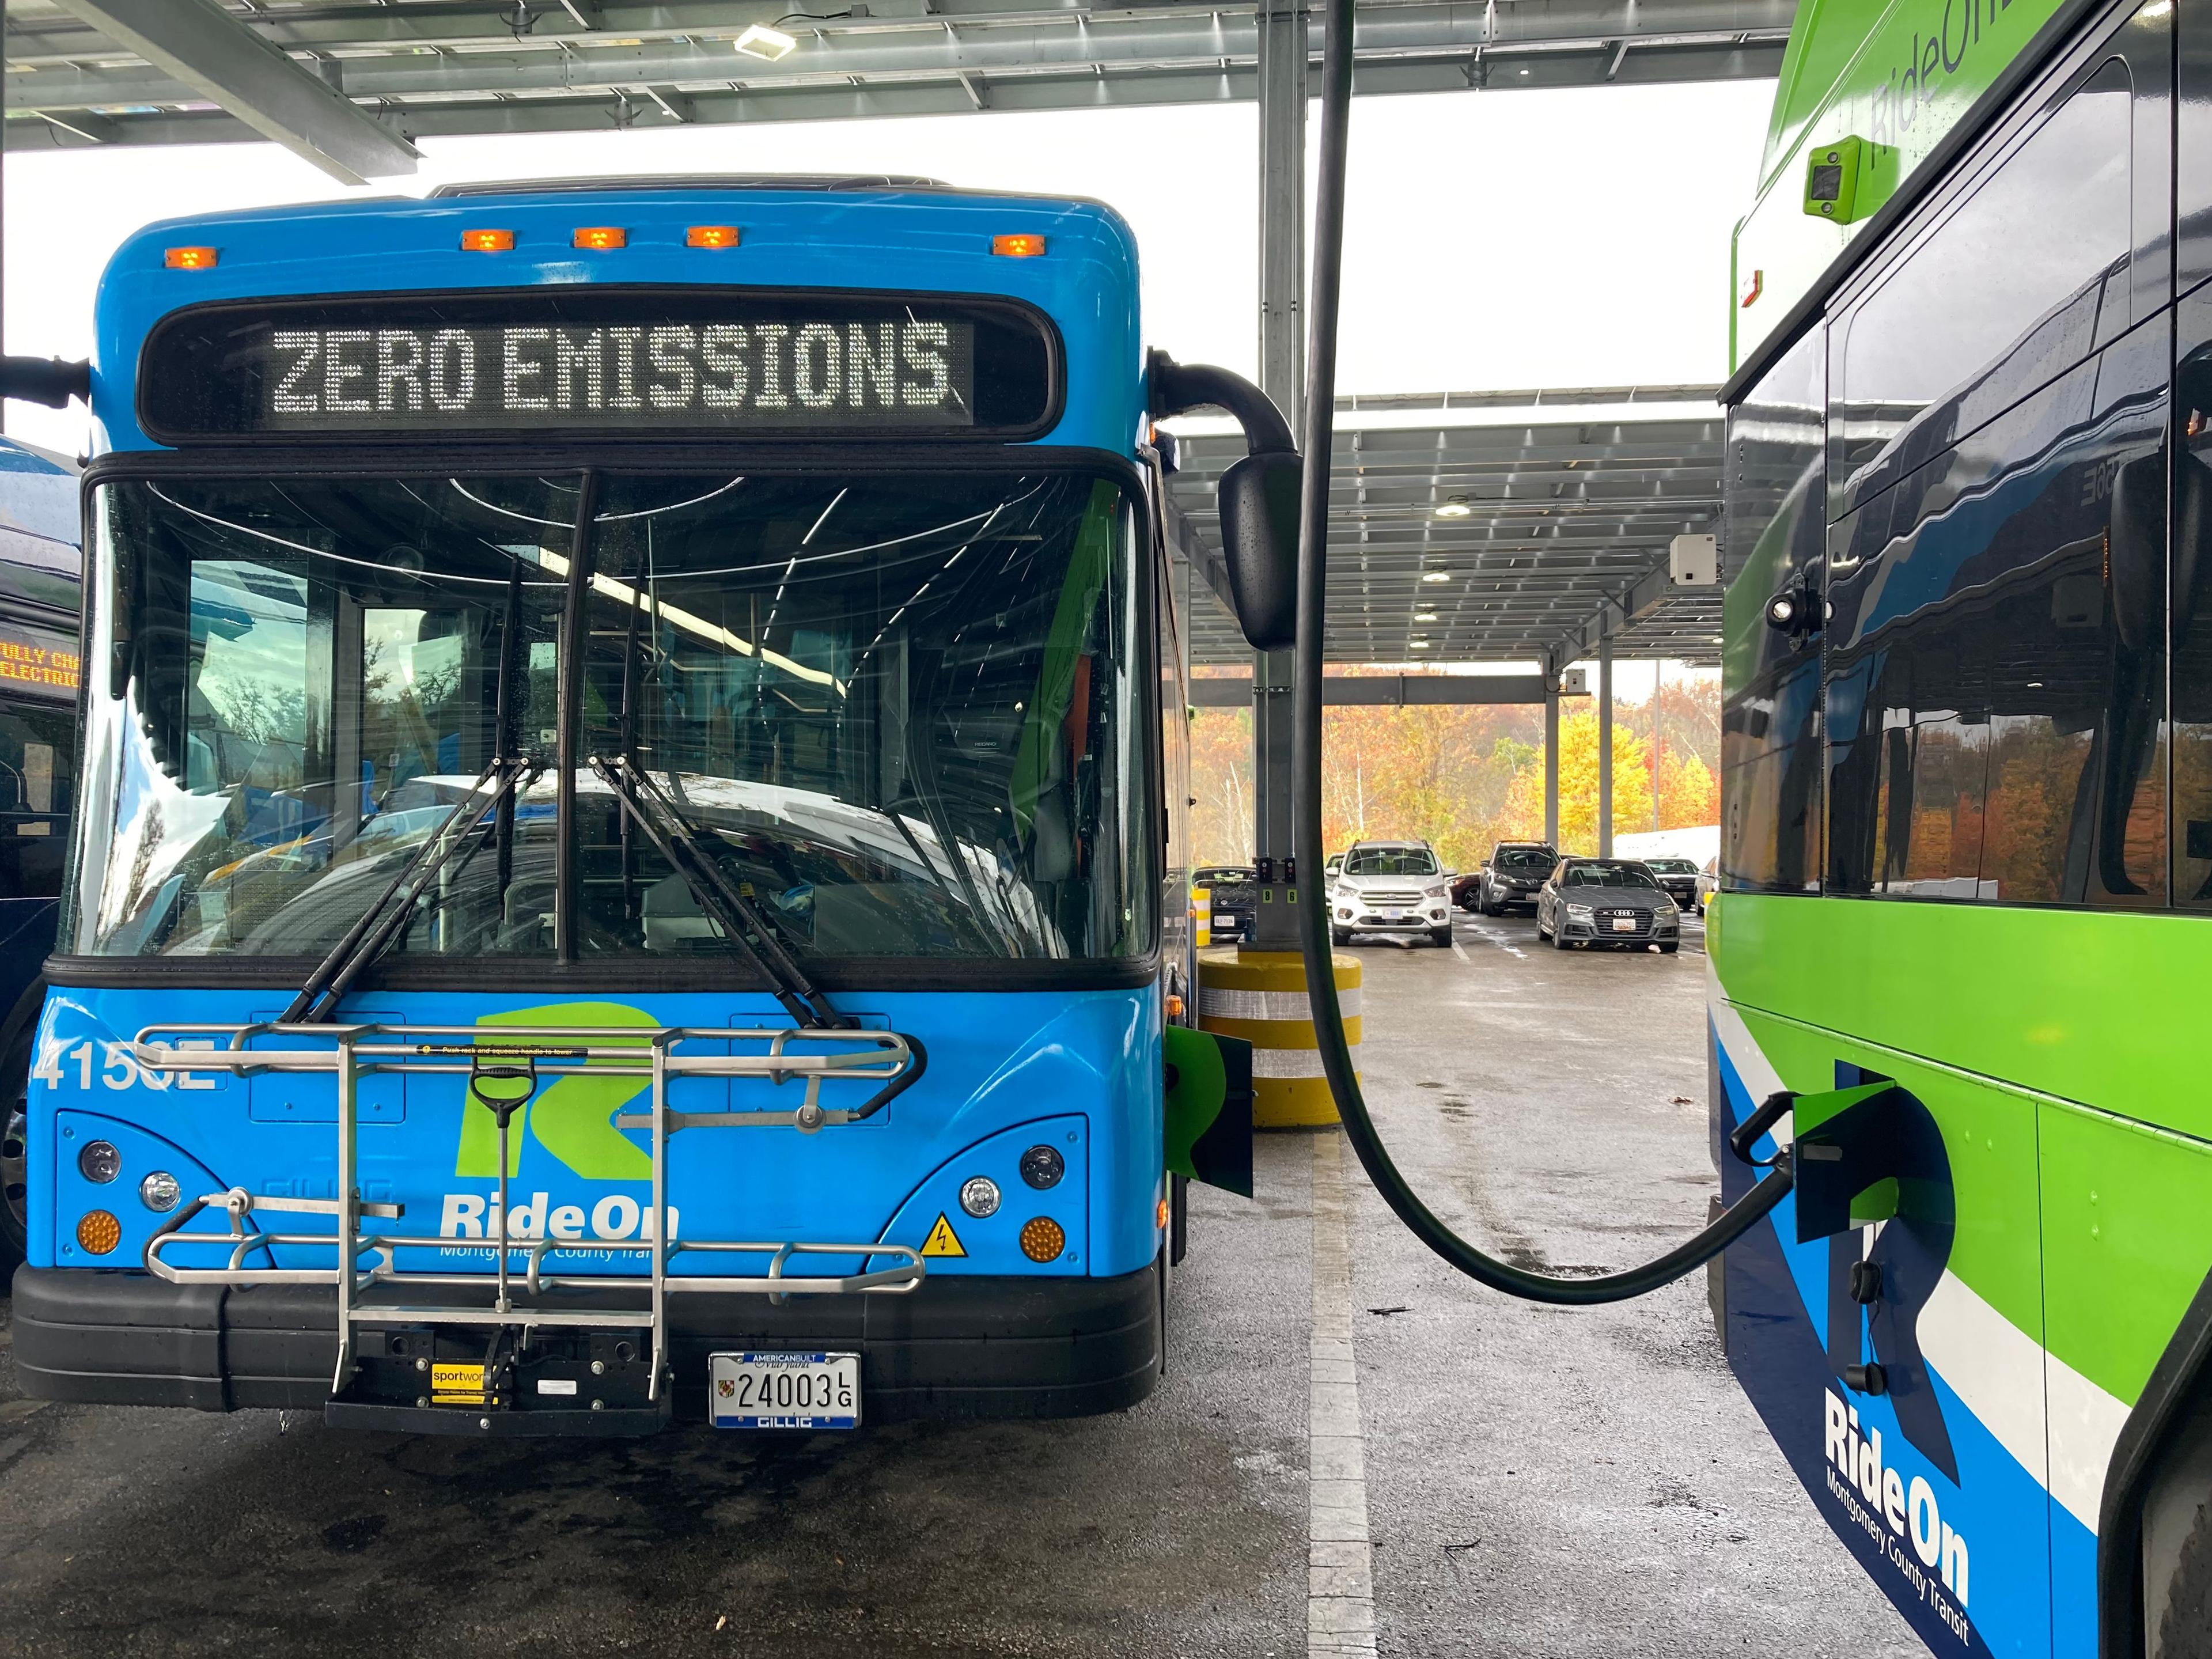 Zero Emissions bus plugged in